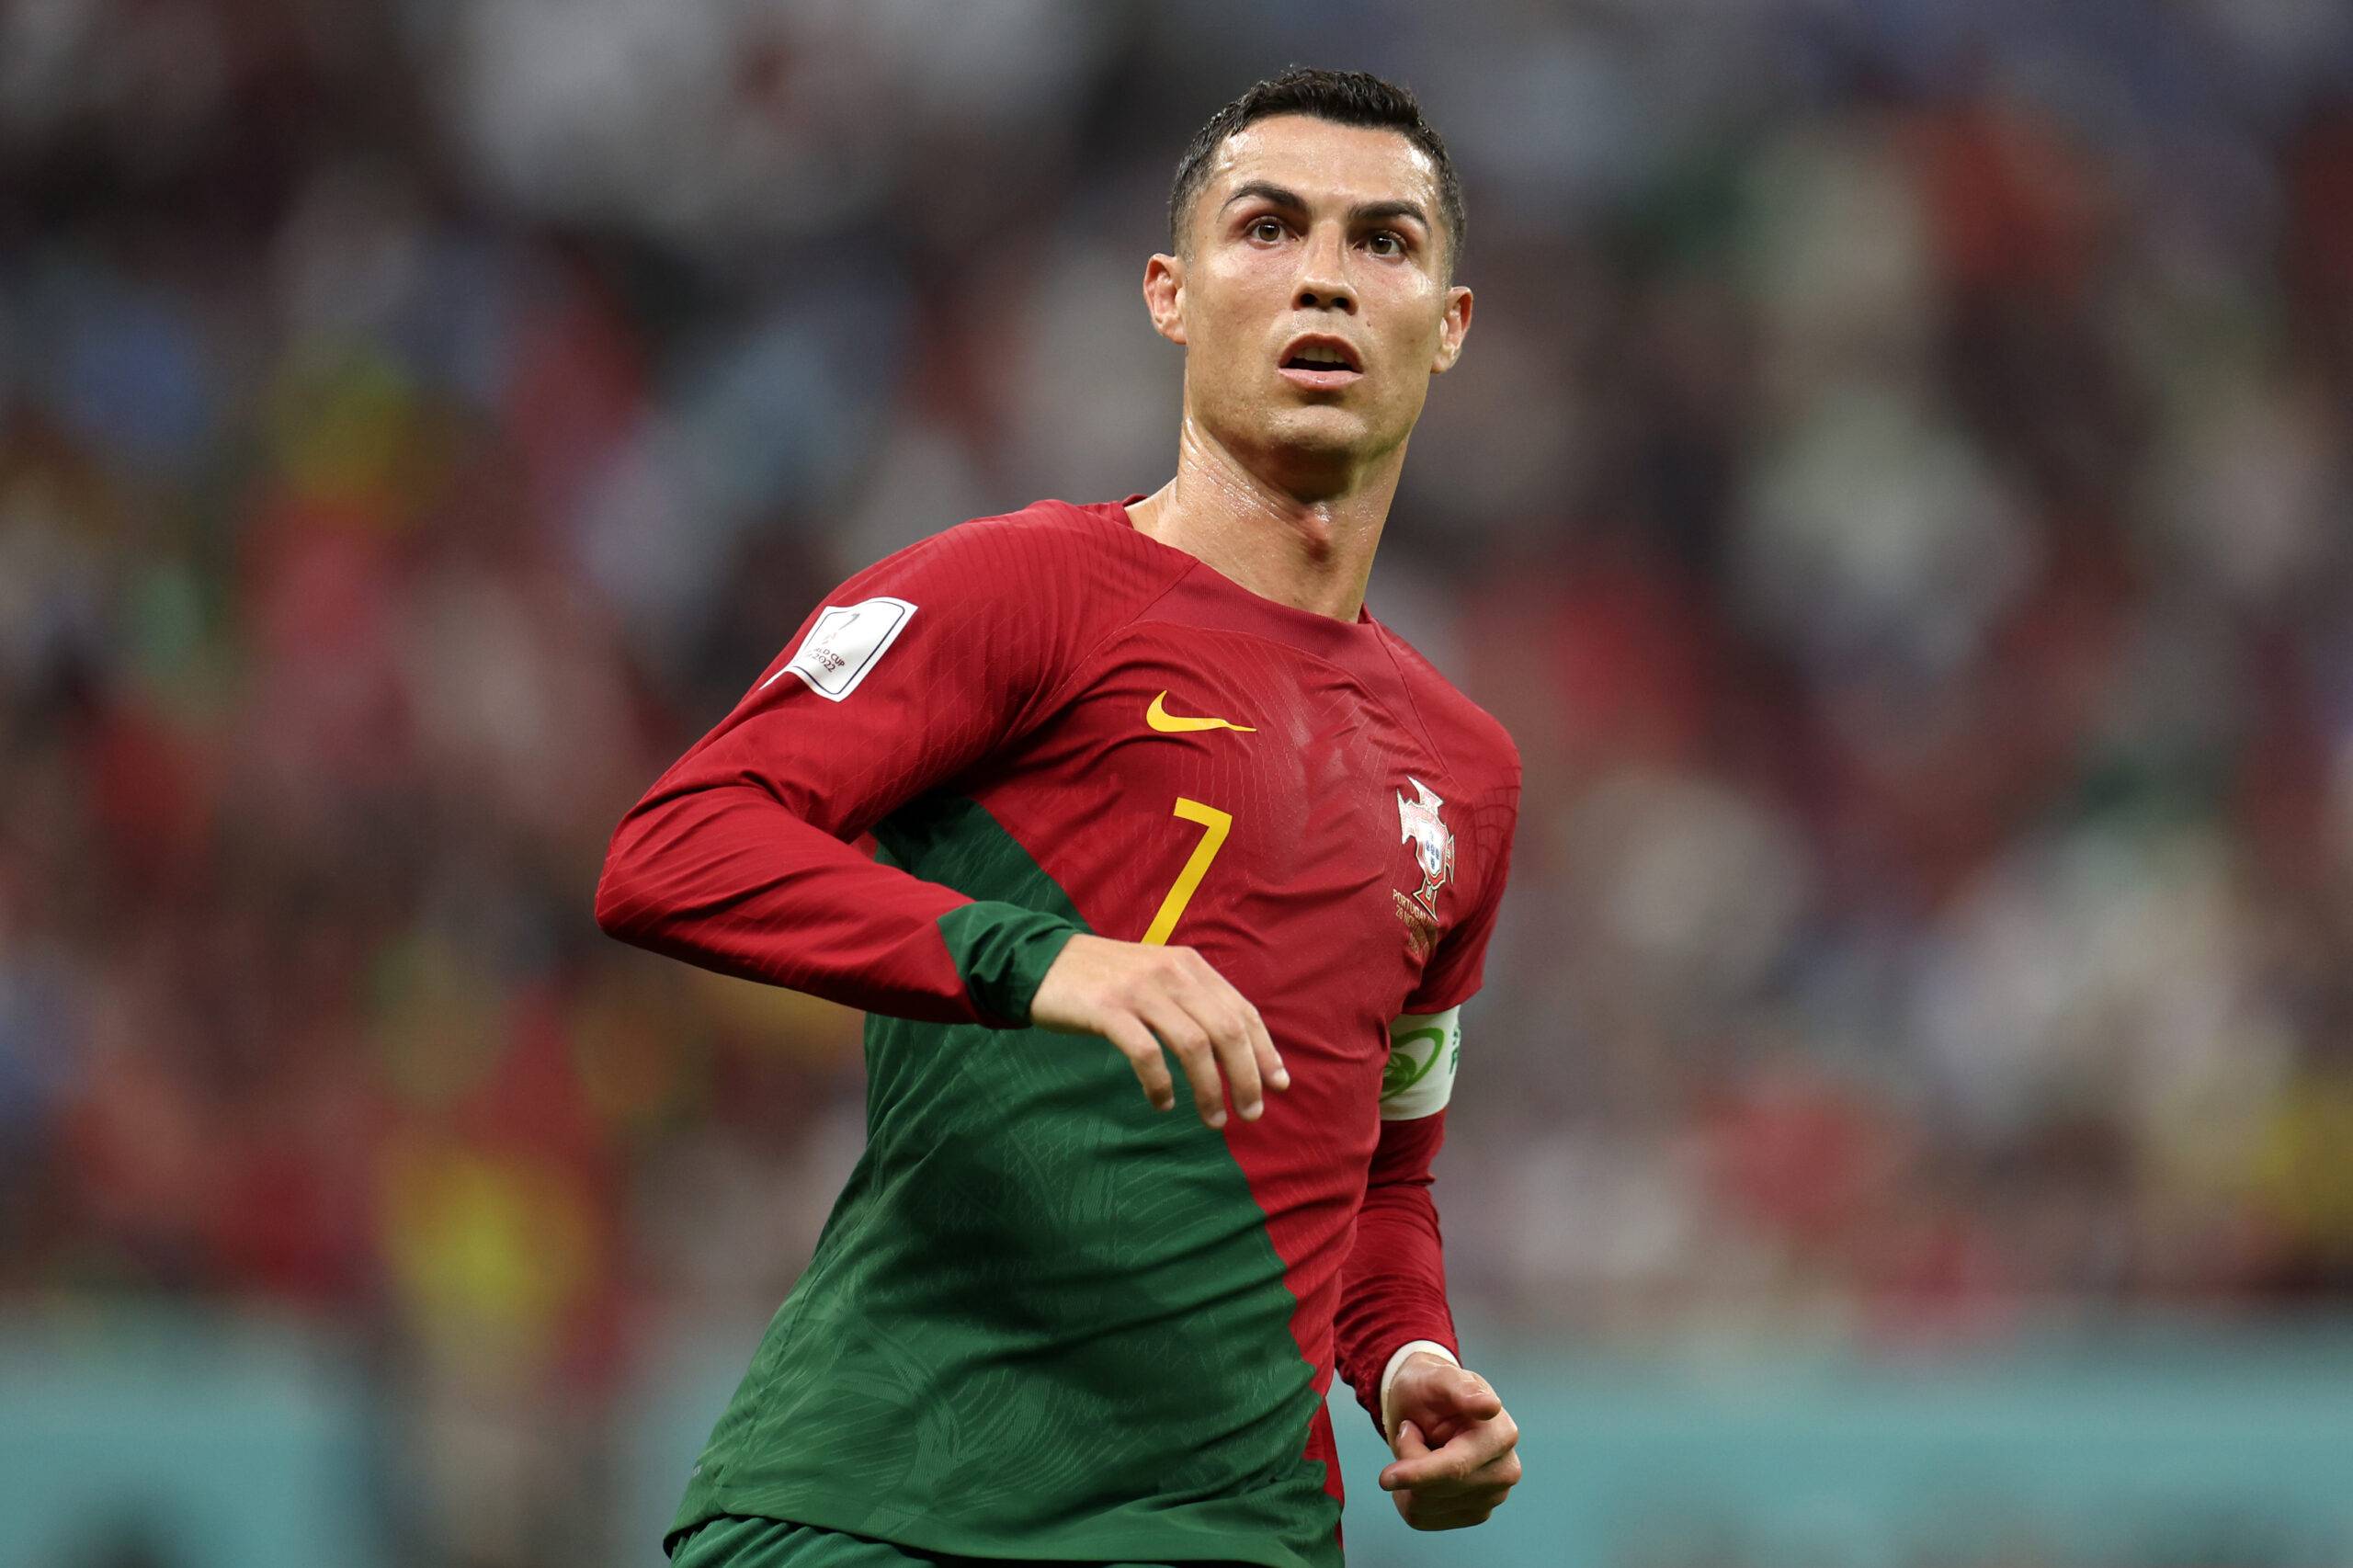 Cristiano Ronaldo’s reaction when he saw Bruno Fernandes had been awarded Portugal’s goal